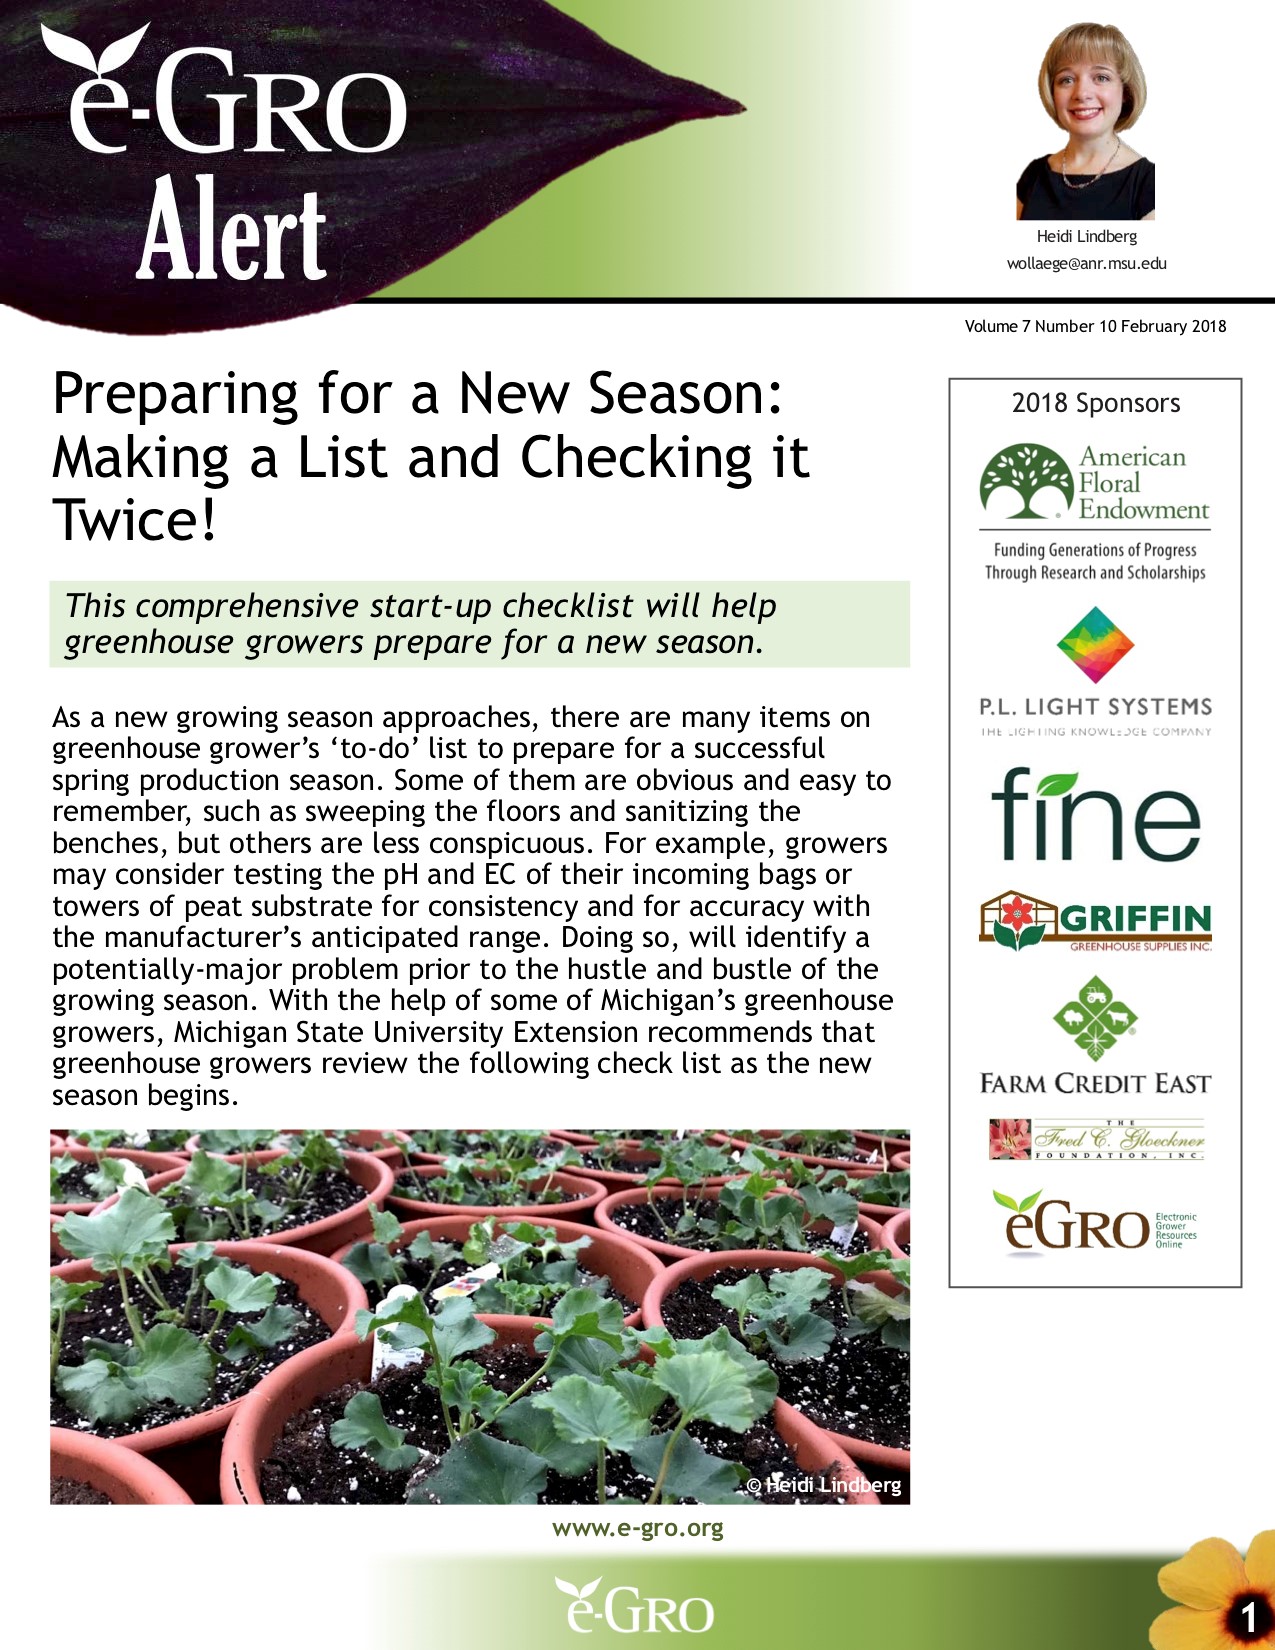 An example of MSU generated e-GRO Alerts.